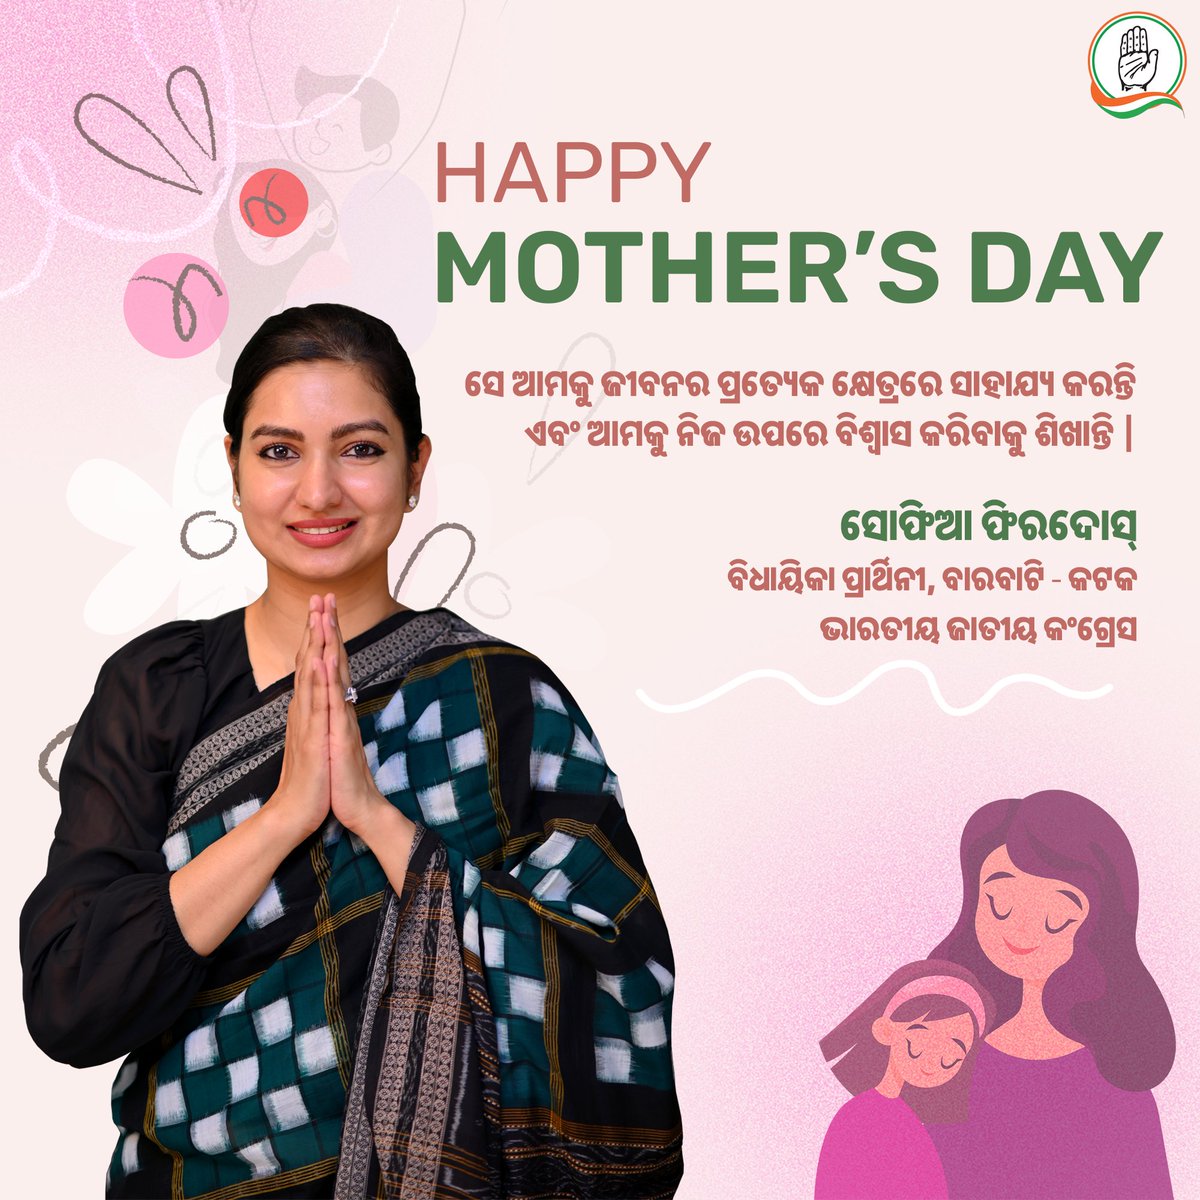 Happy Mother's Day. #sofiafirdous #cuttack #vote4sofia #cuttackpride #cuttackcity #cuttackcongress #amacuttack #cuttackbuzz #voteforsofia #cuttackchangemaker #happymothersday #mothersday